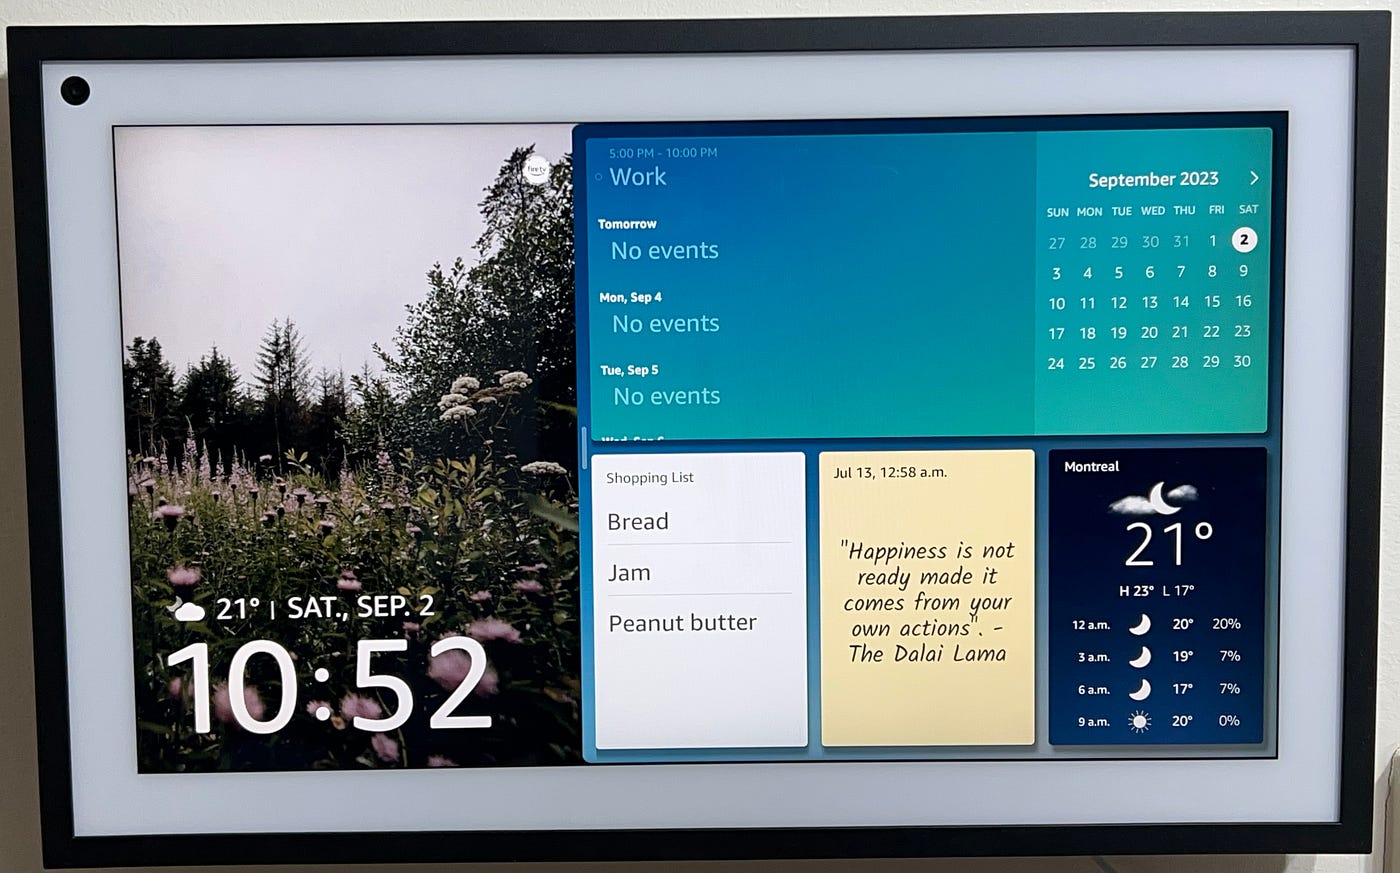 Echo Show 15: Not Quite The Smart Display I Was Looking For